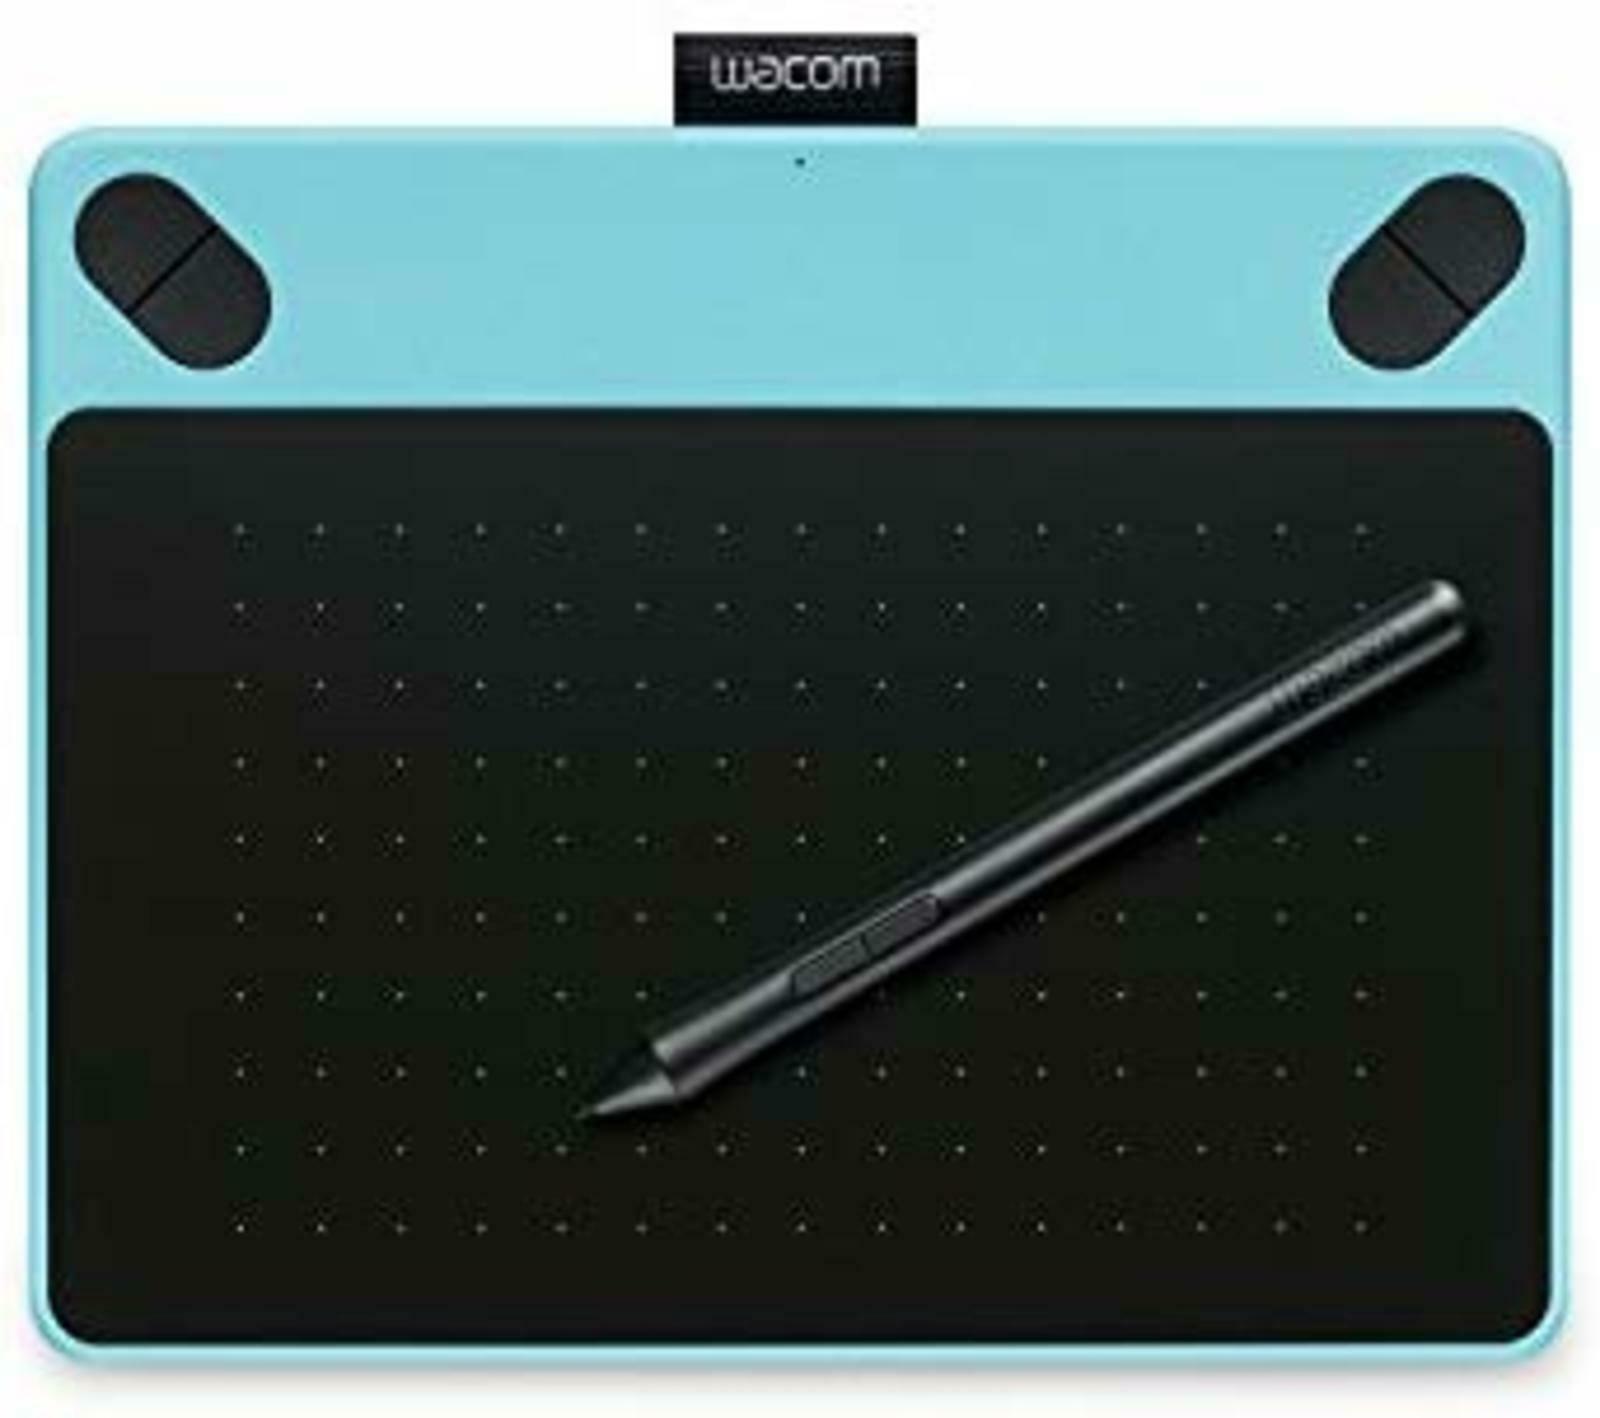 WACOM Intuos Draw S Size Pen Touch Tablet CTL-490/W0 Blue Manga illustration F/S